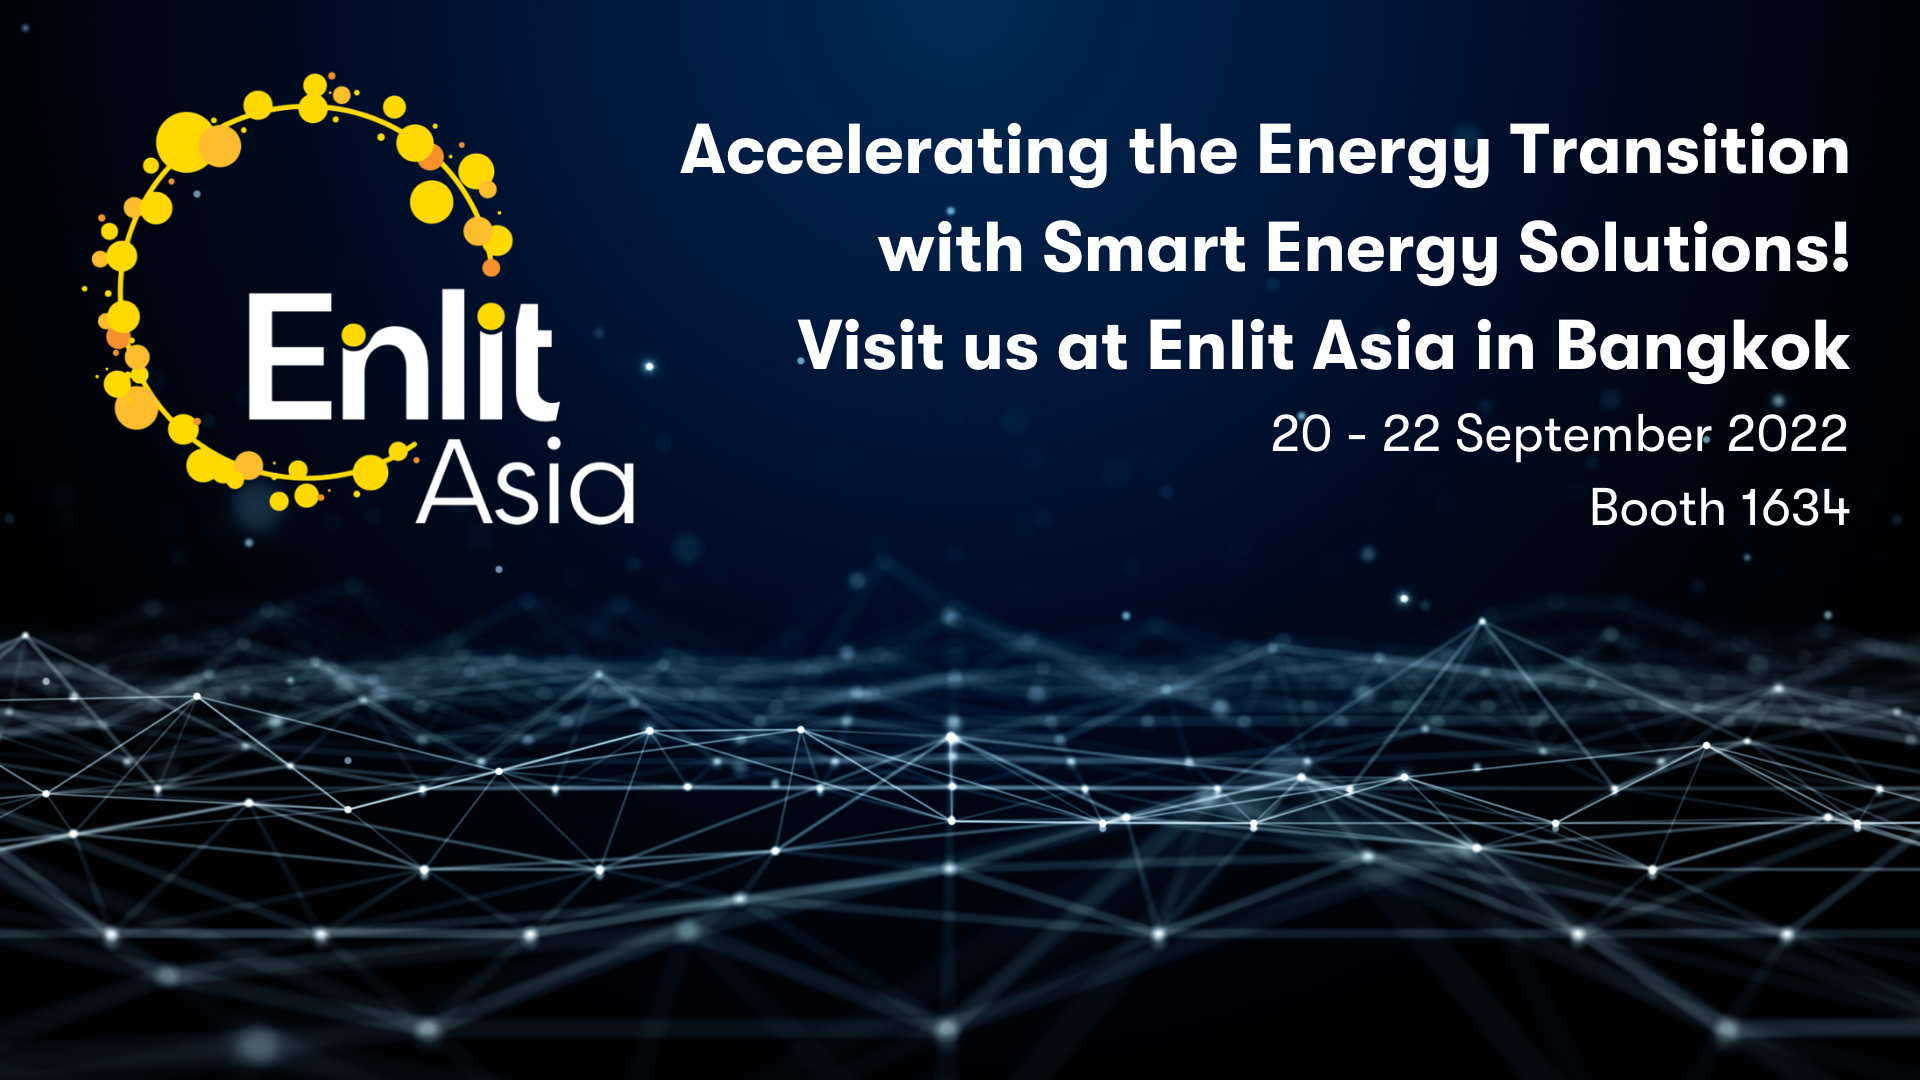 uploads/pics/https://trading.iqony.energy/uploads/pics/Accelerating_the_Energy_Transition_with_Smart_Digital_Solutions_Visit_us_at_Enlit_Asia_in_Bangkok__1__06.png